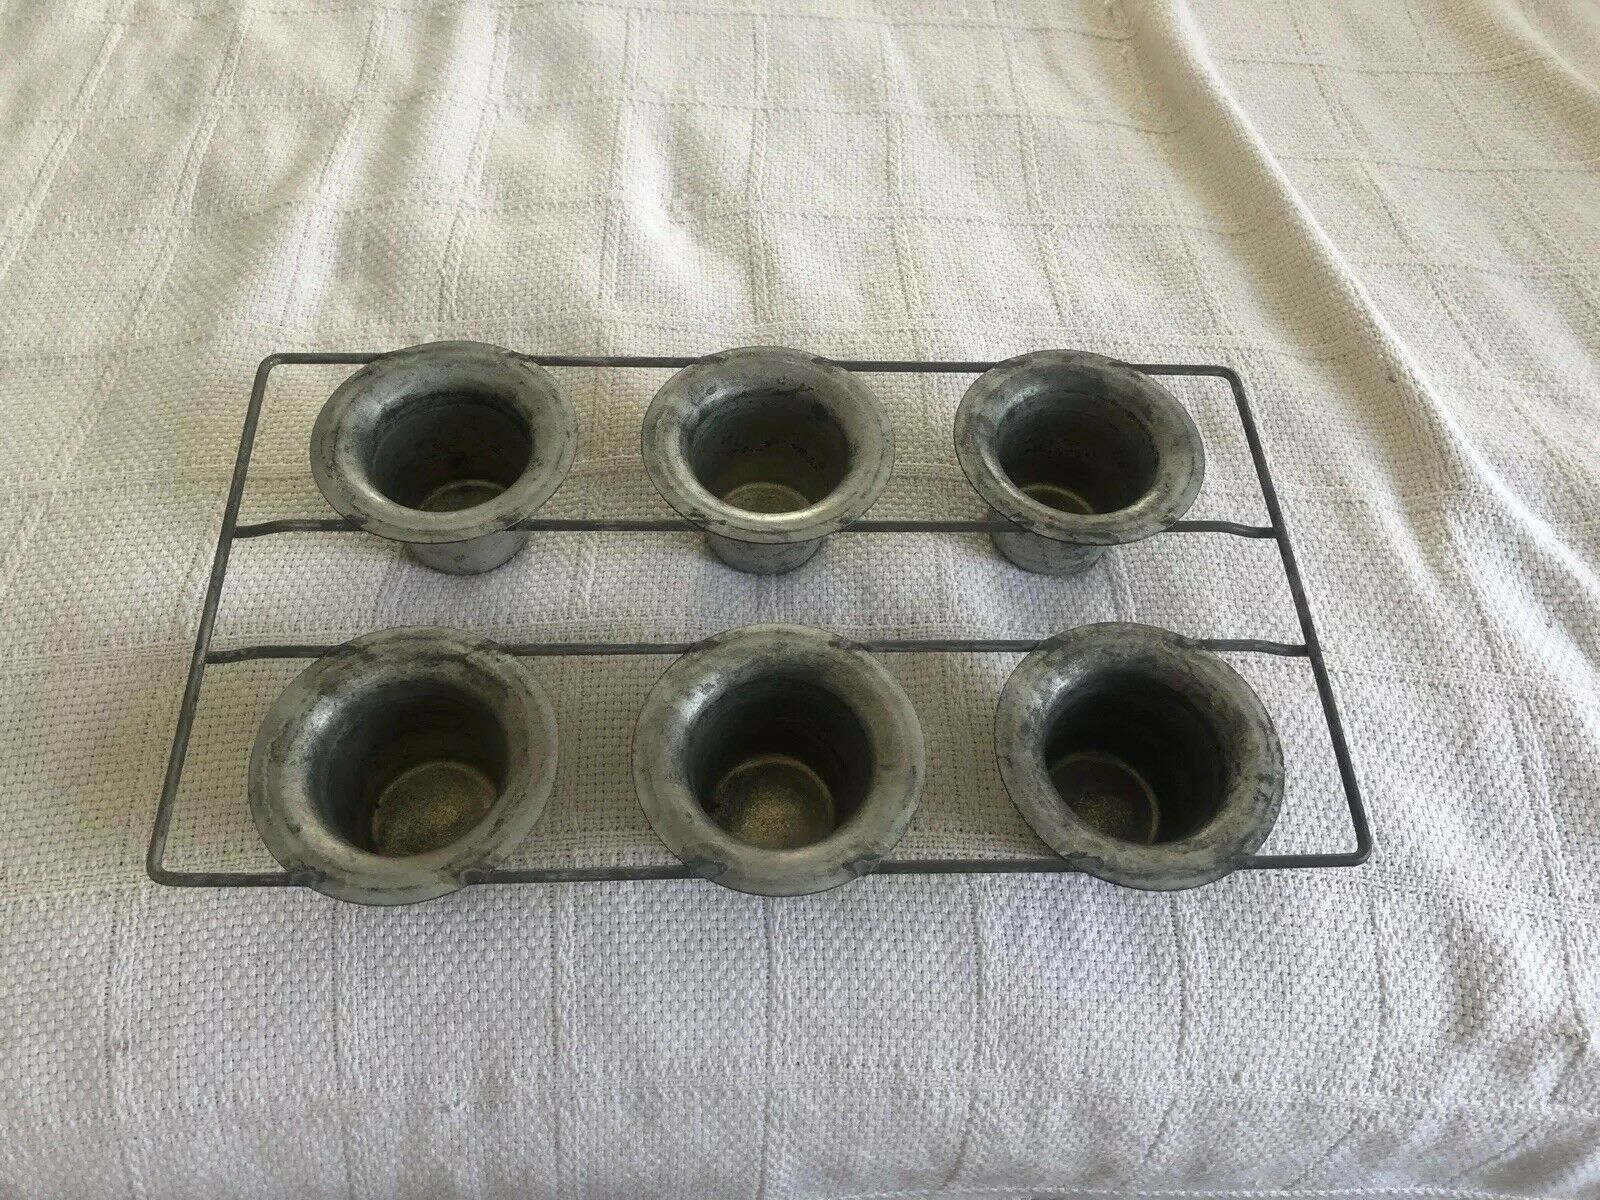 Primary image for Vintage Popover Pan Baking Muffin Tins Metal Coating Yorkshire Pudding Bakery